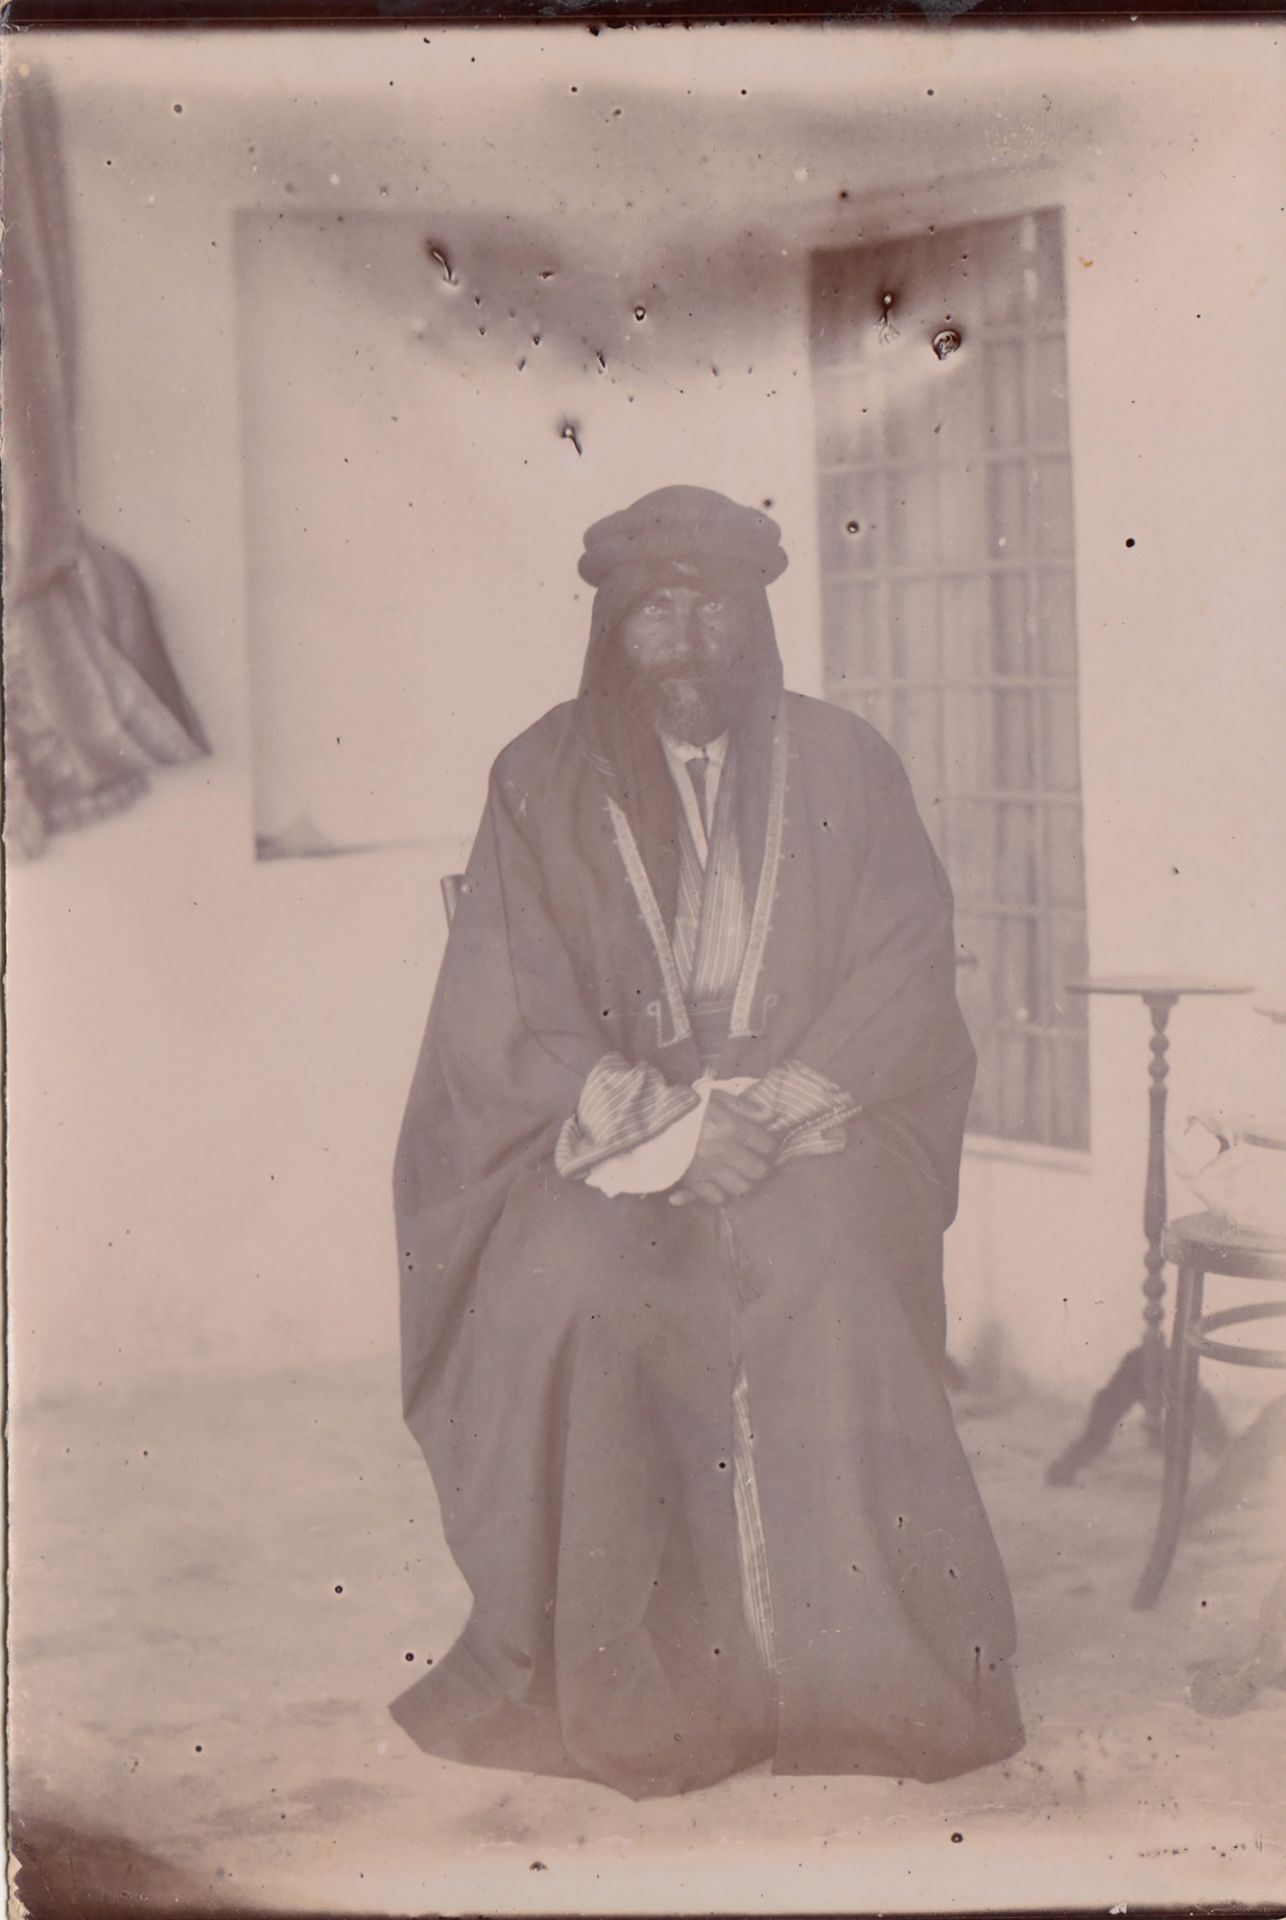 A RARE ARCHIVE ABOUT YEMEN, BELONGED TO AHMED IZZET PASHA - Image 34 of 77